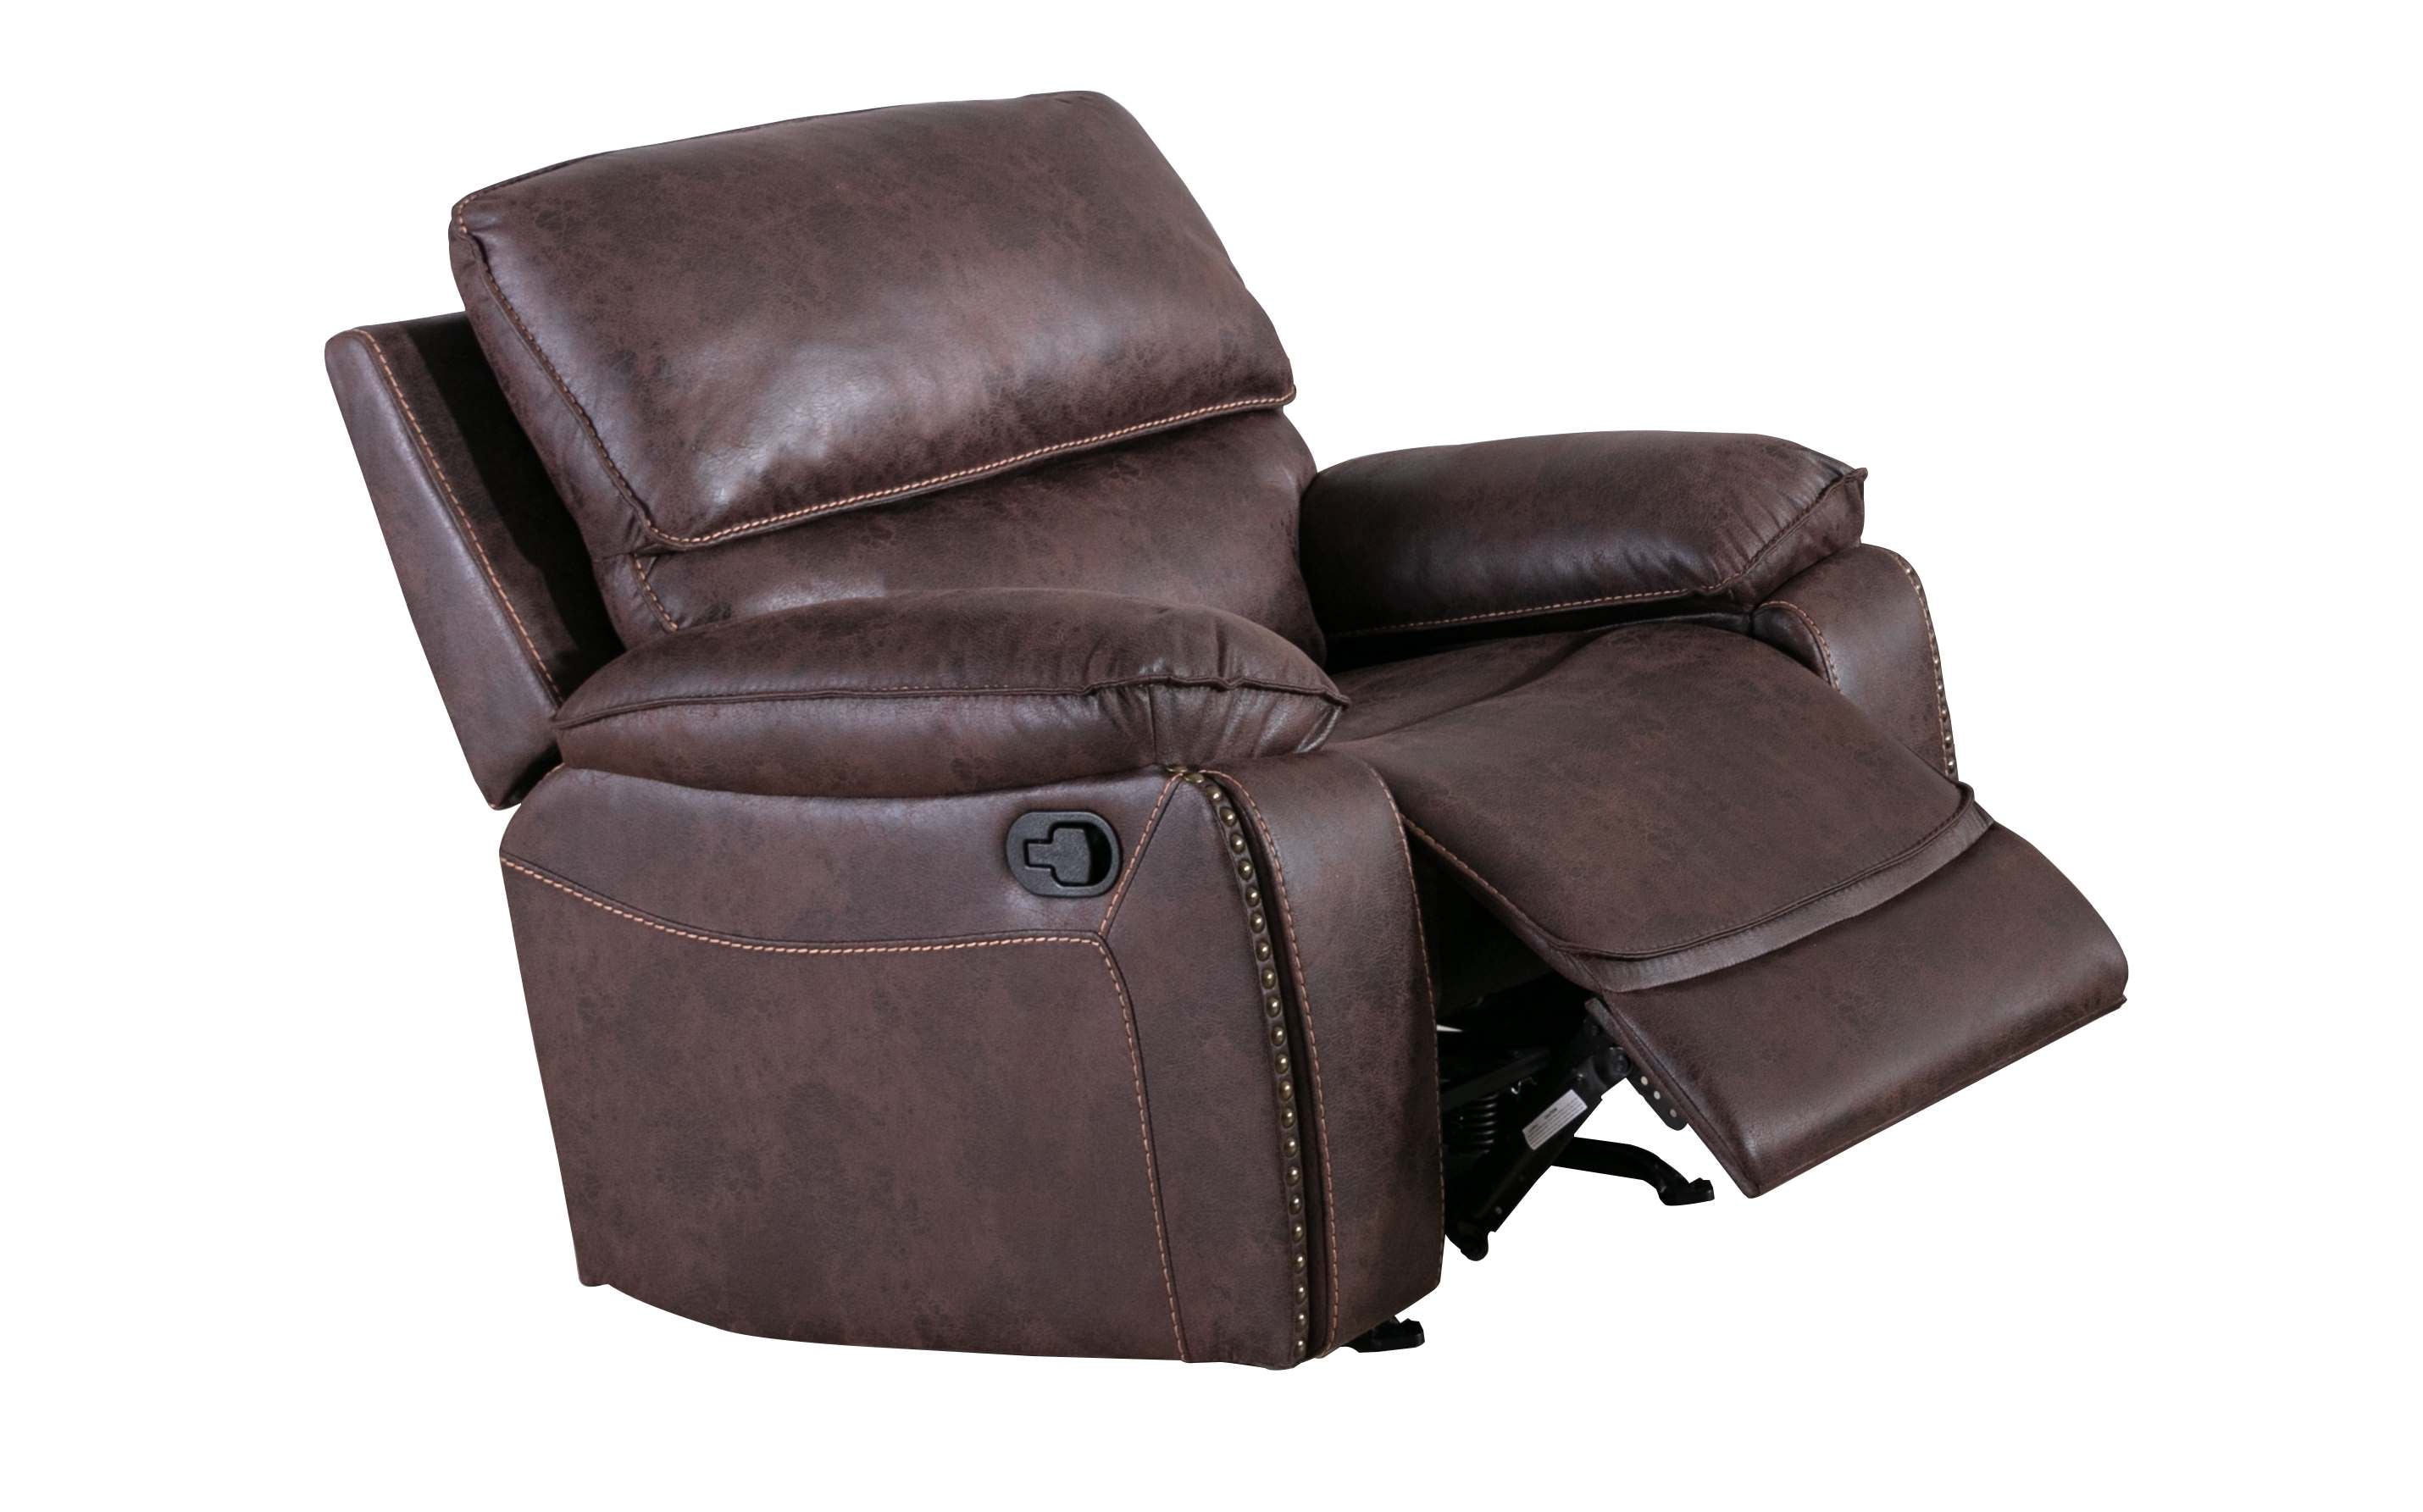 Kincaide Reclining Sofa Collection Brown 99934